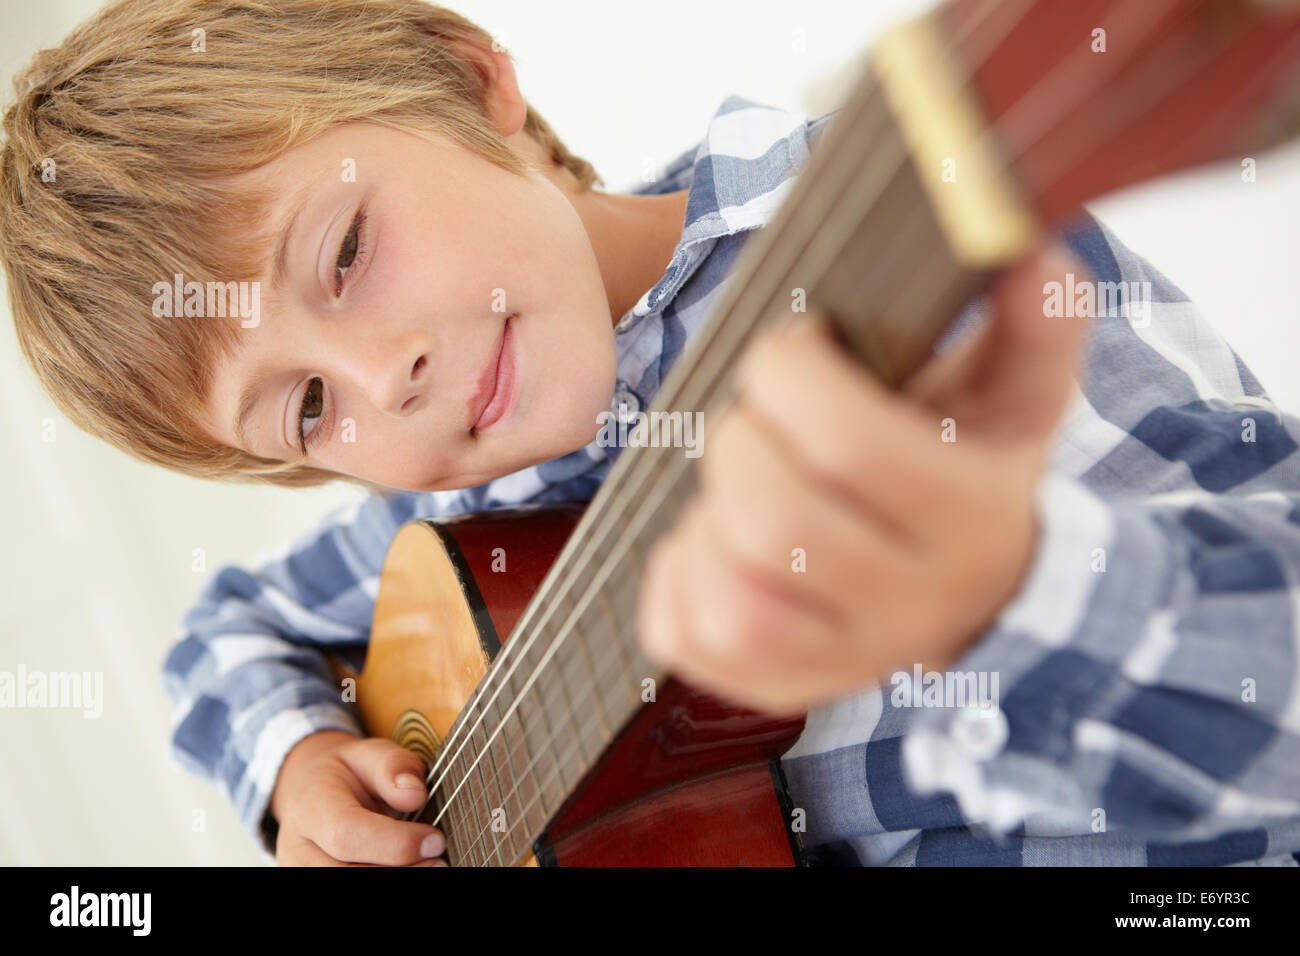 Young boy playing acoustic guitar Stock Photo